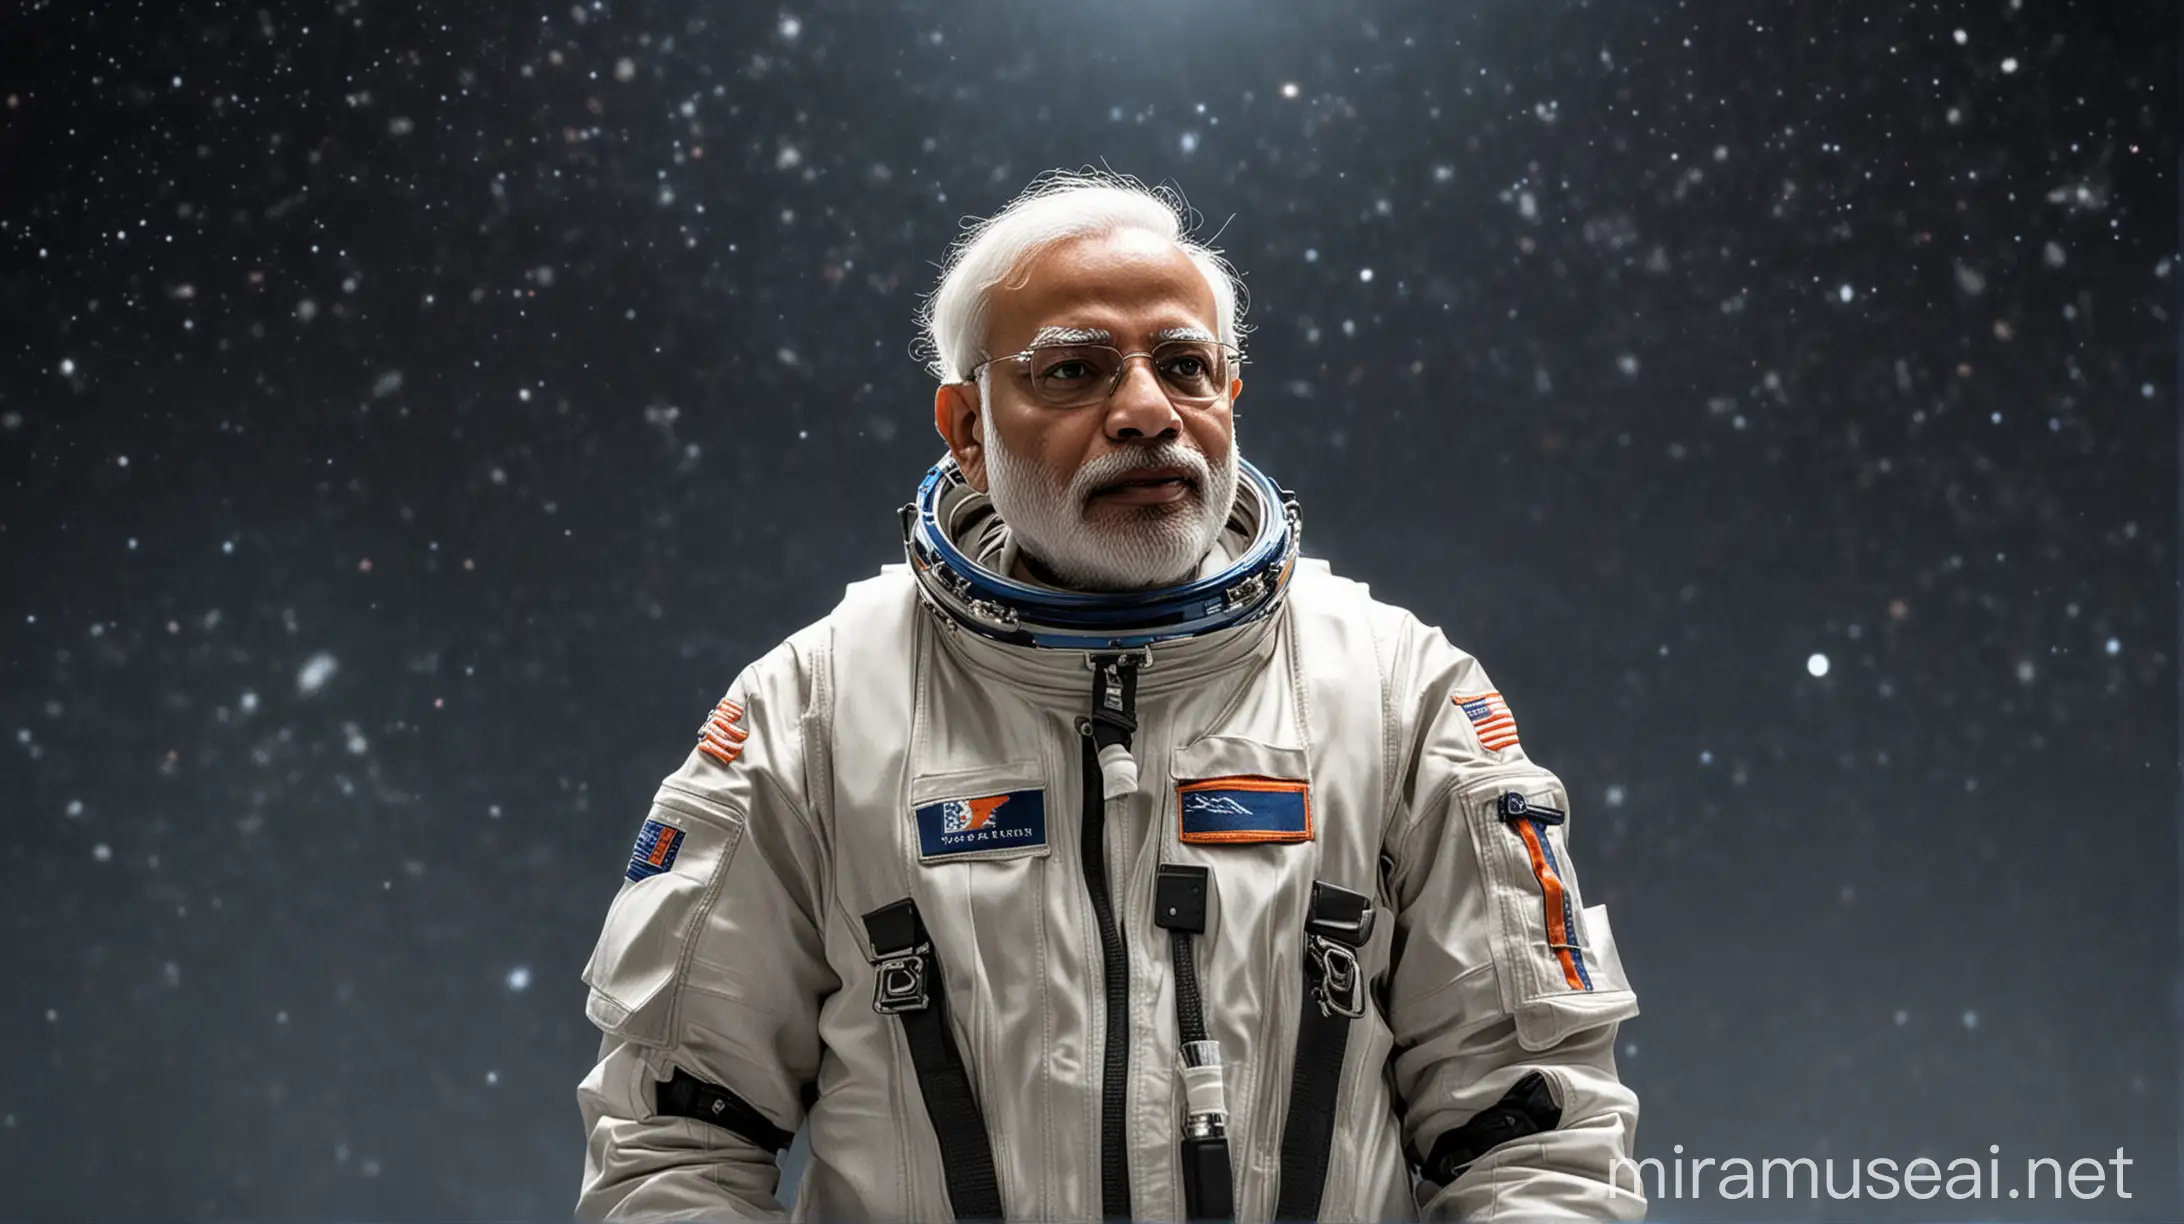 Indian Prime Minister Narendra Modi as Scientist Wearing Space Suit